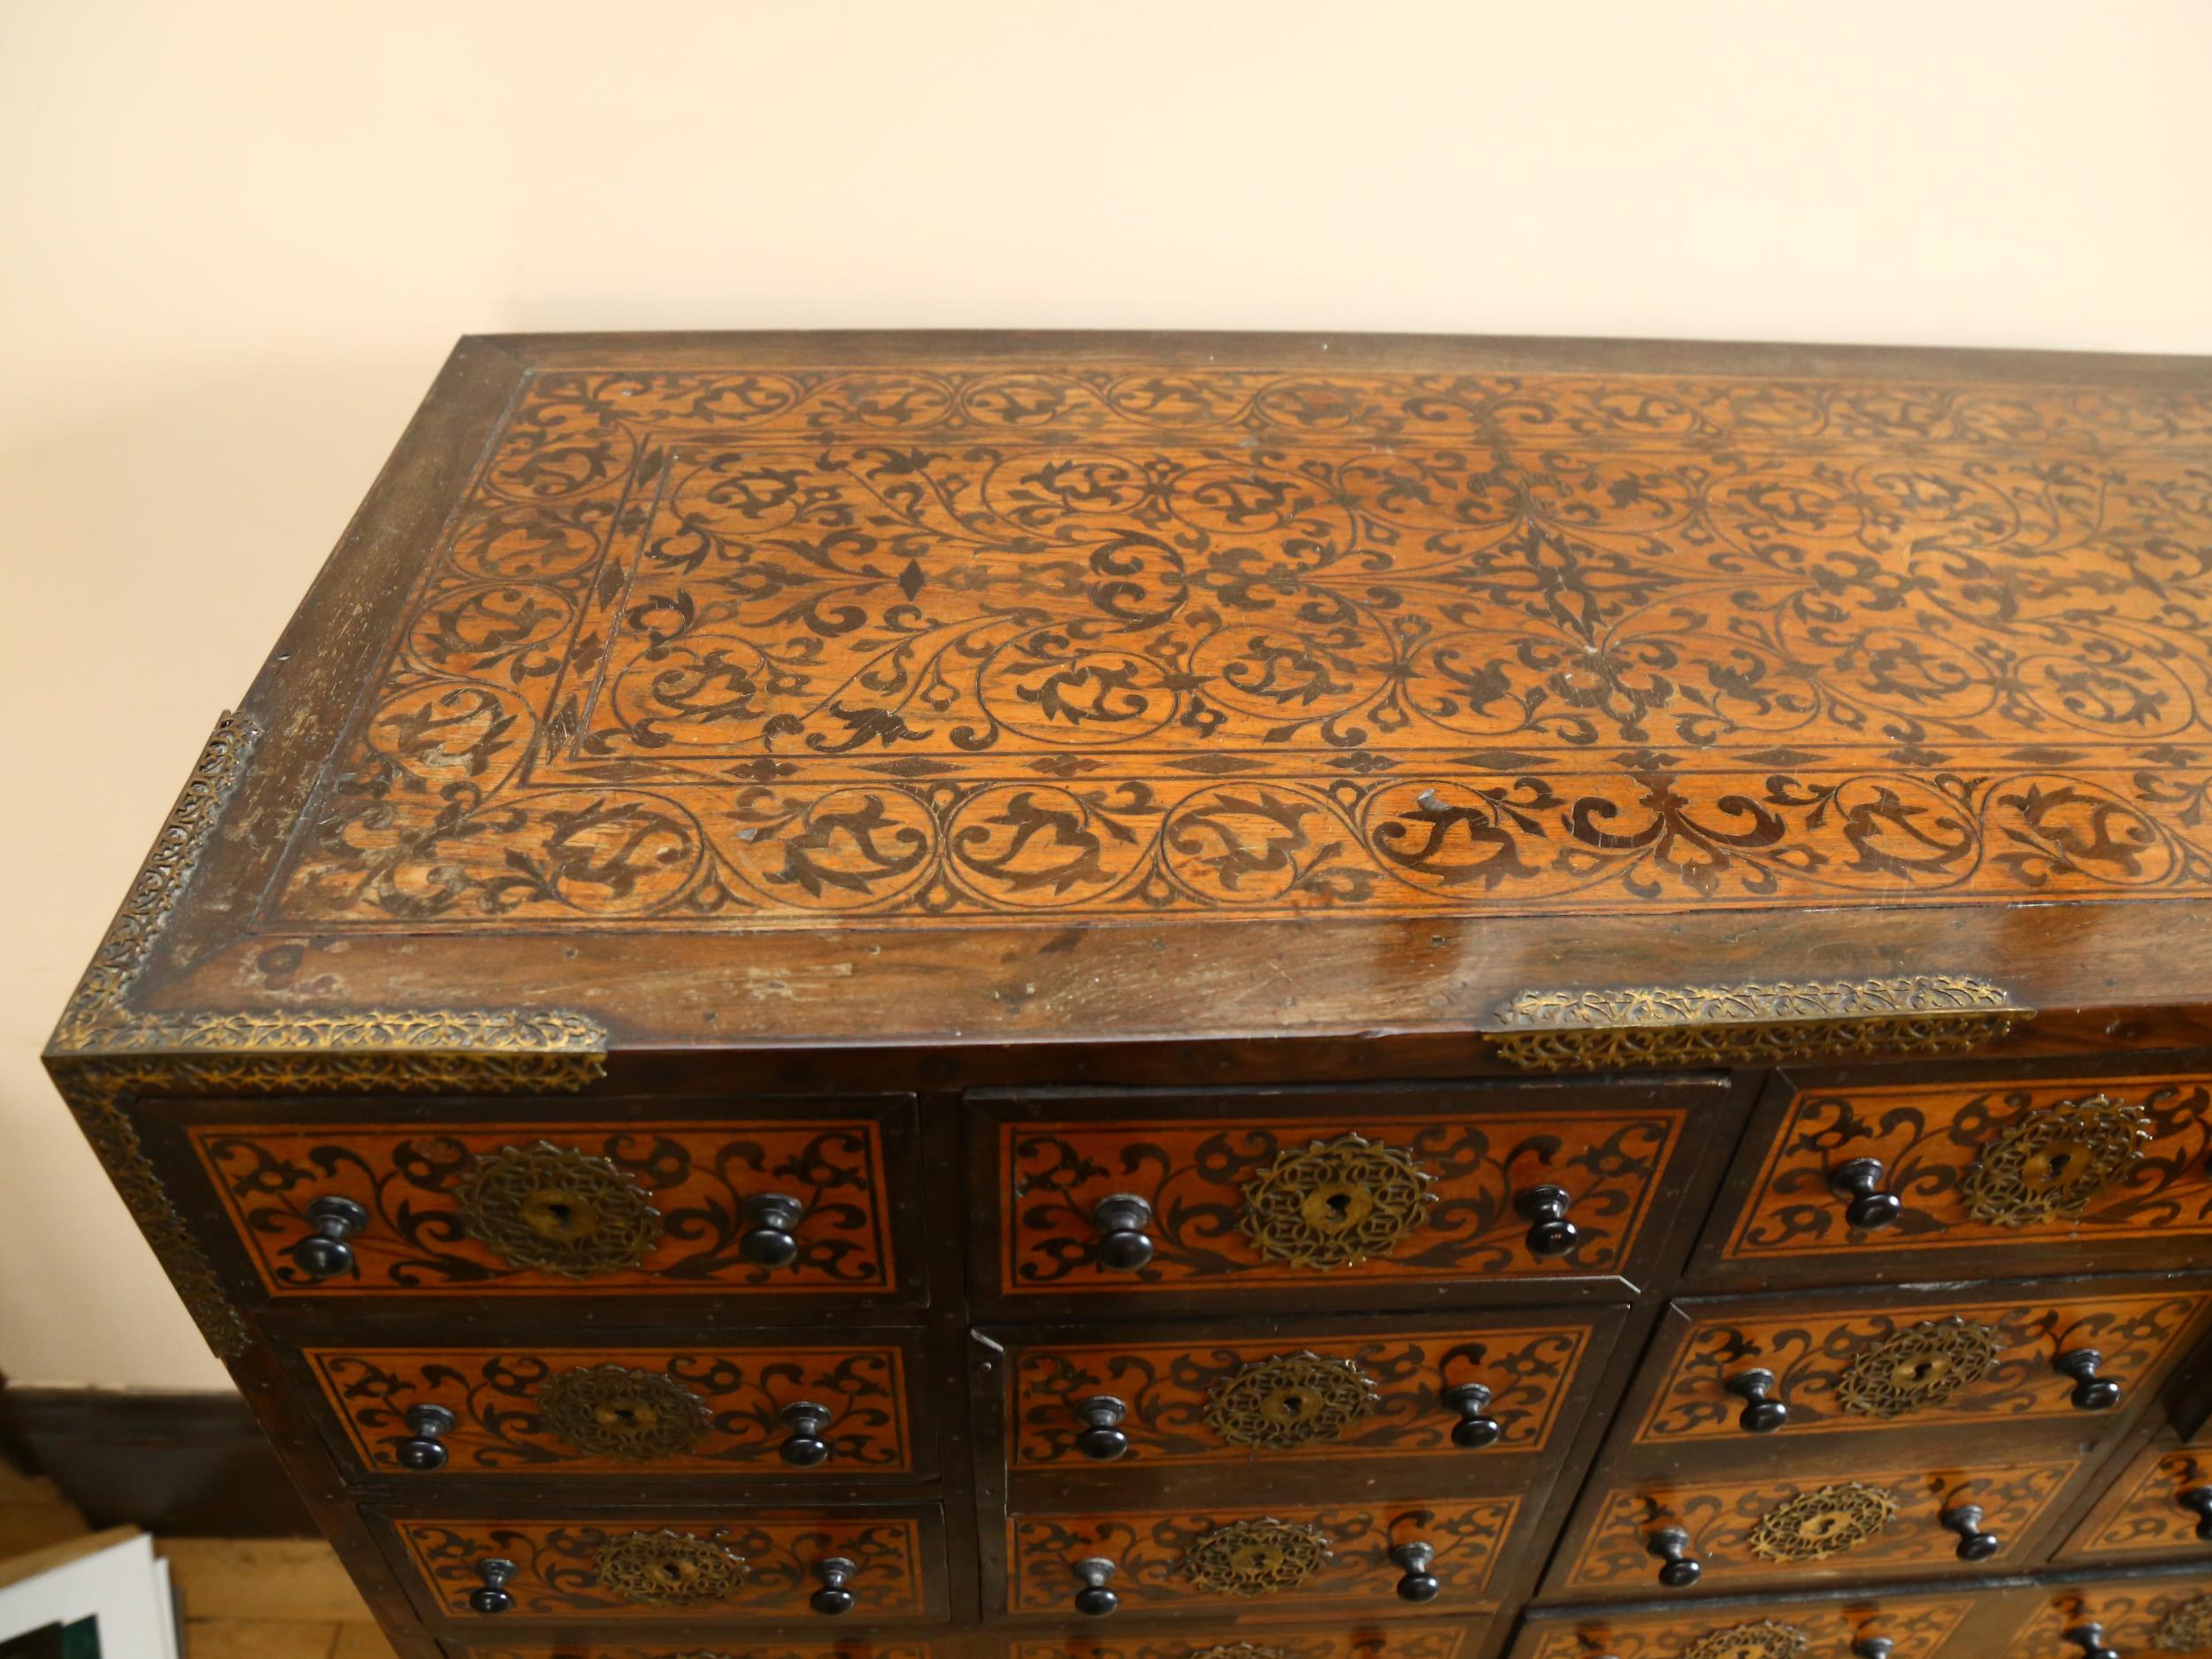 An Indo-Portuguese cabinet on stand (Contador), late 17th century, possibly Old Goa, brass-bound - Image 11 of 19